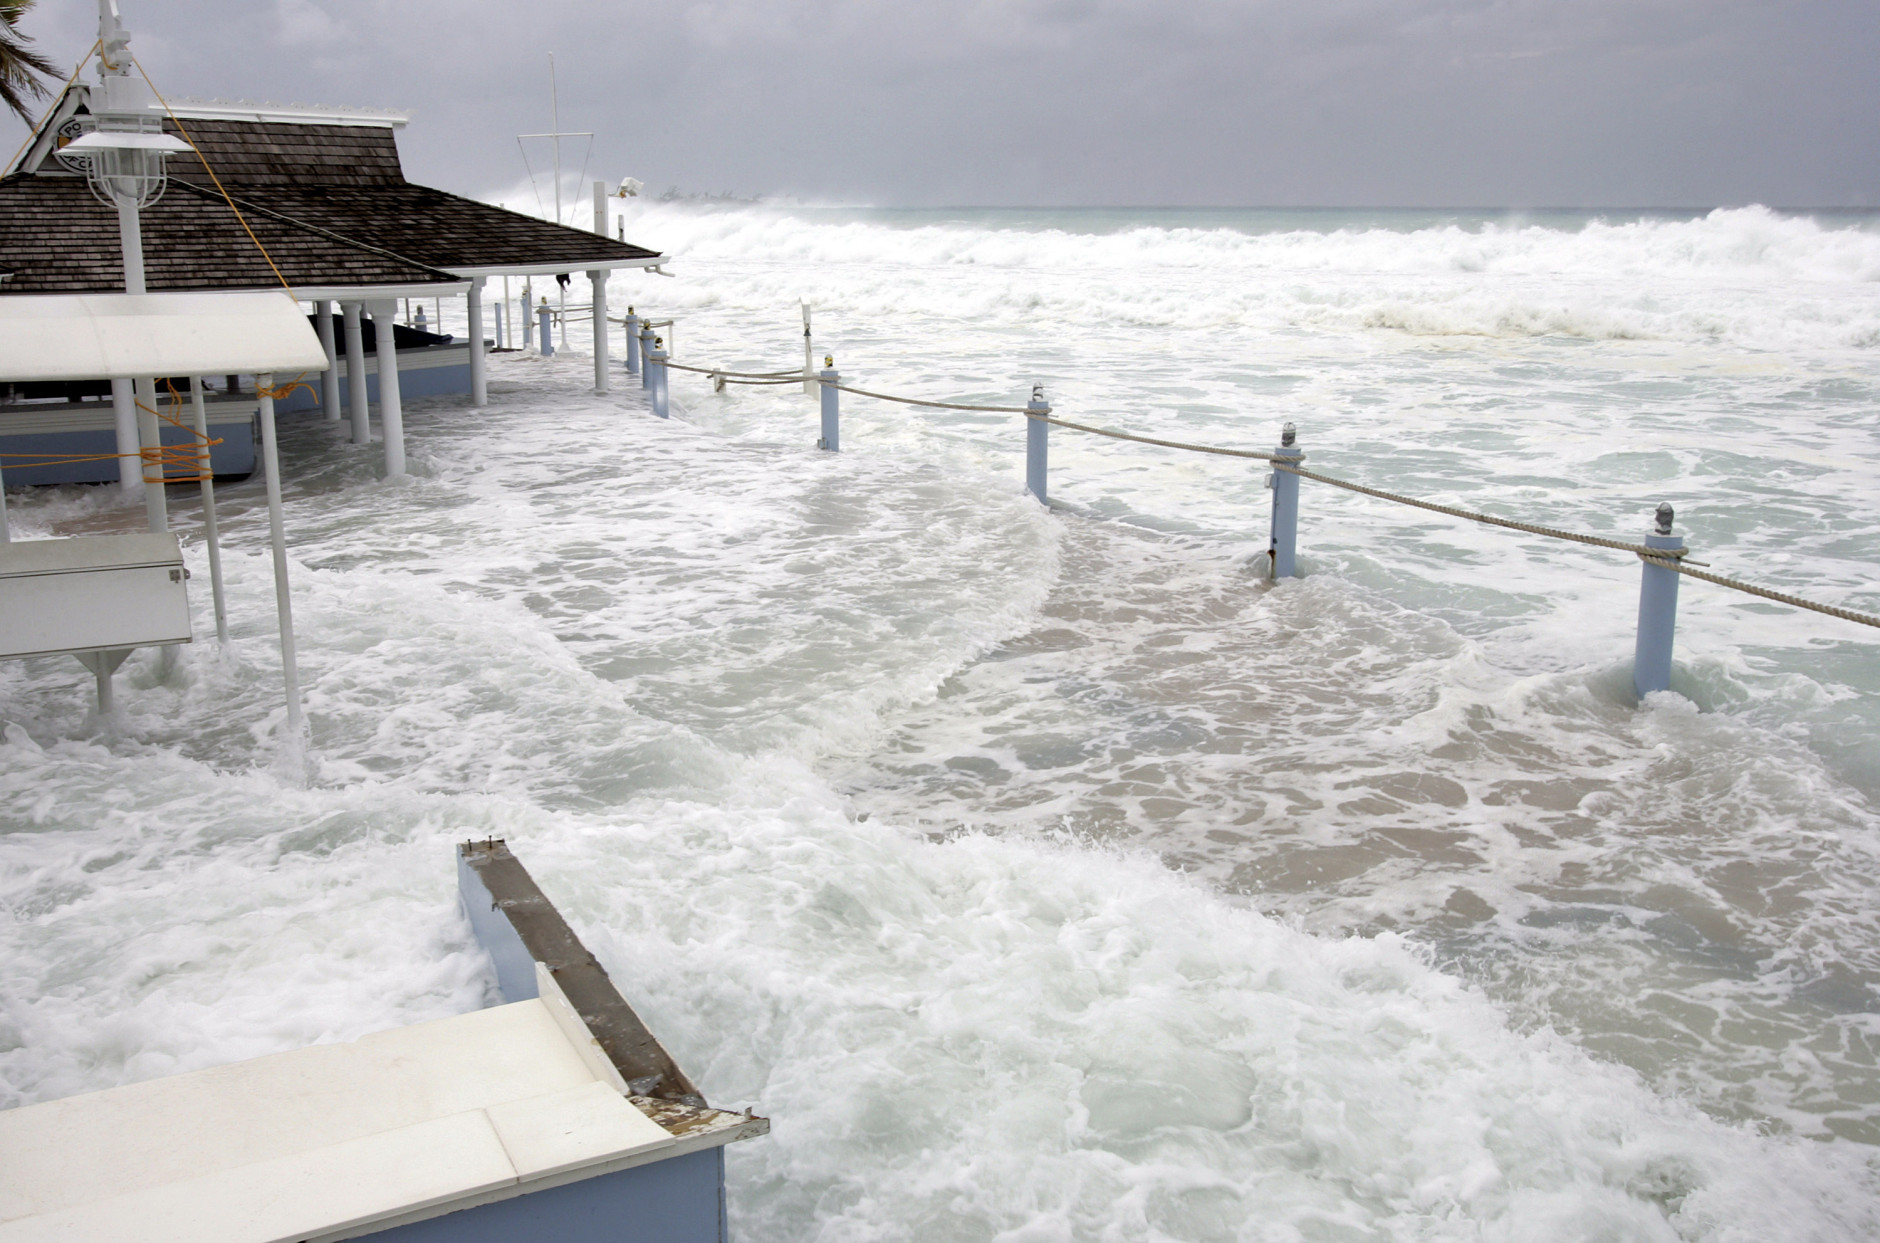 Waves reach The Wharf patio restaurant, damaging the bar and main deck, in George Town, Grand Cayman Island, Thursday, Oct. 20, 2005. Hurricane Wilma moved away from the Cayman Islands but residents and tourists are still feeling rough seas and battering waves on the south and west coasts. (AP Photo/Caymanian Compass, Justin Uzzell)